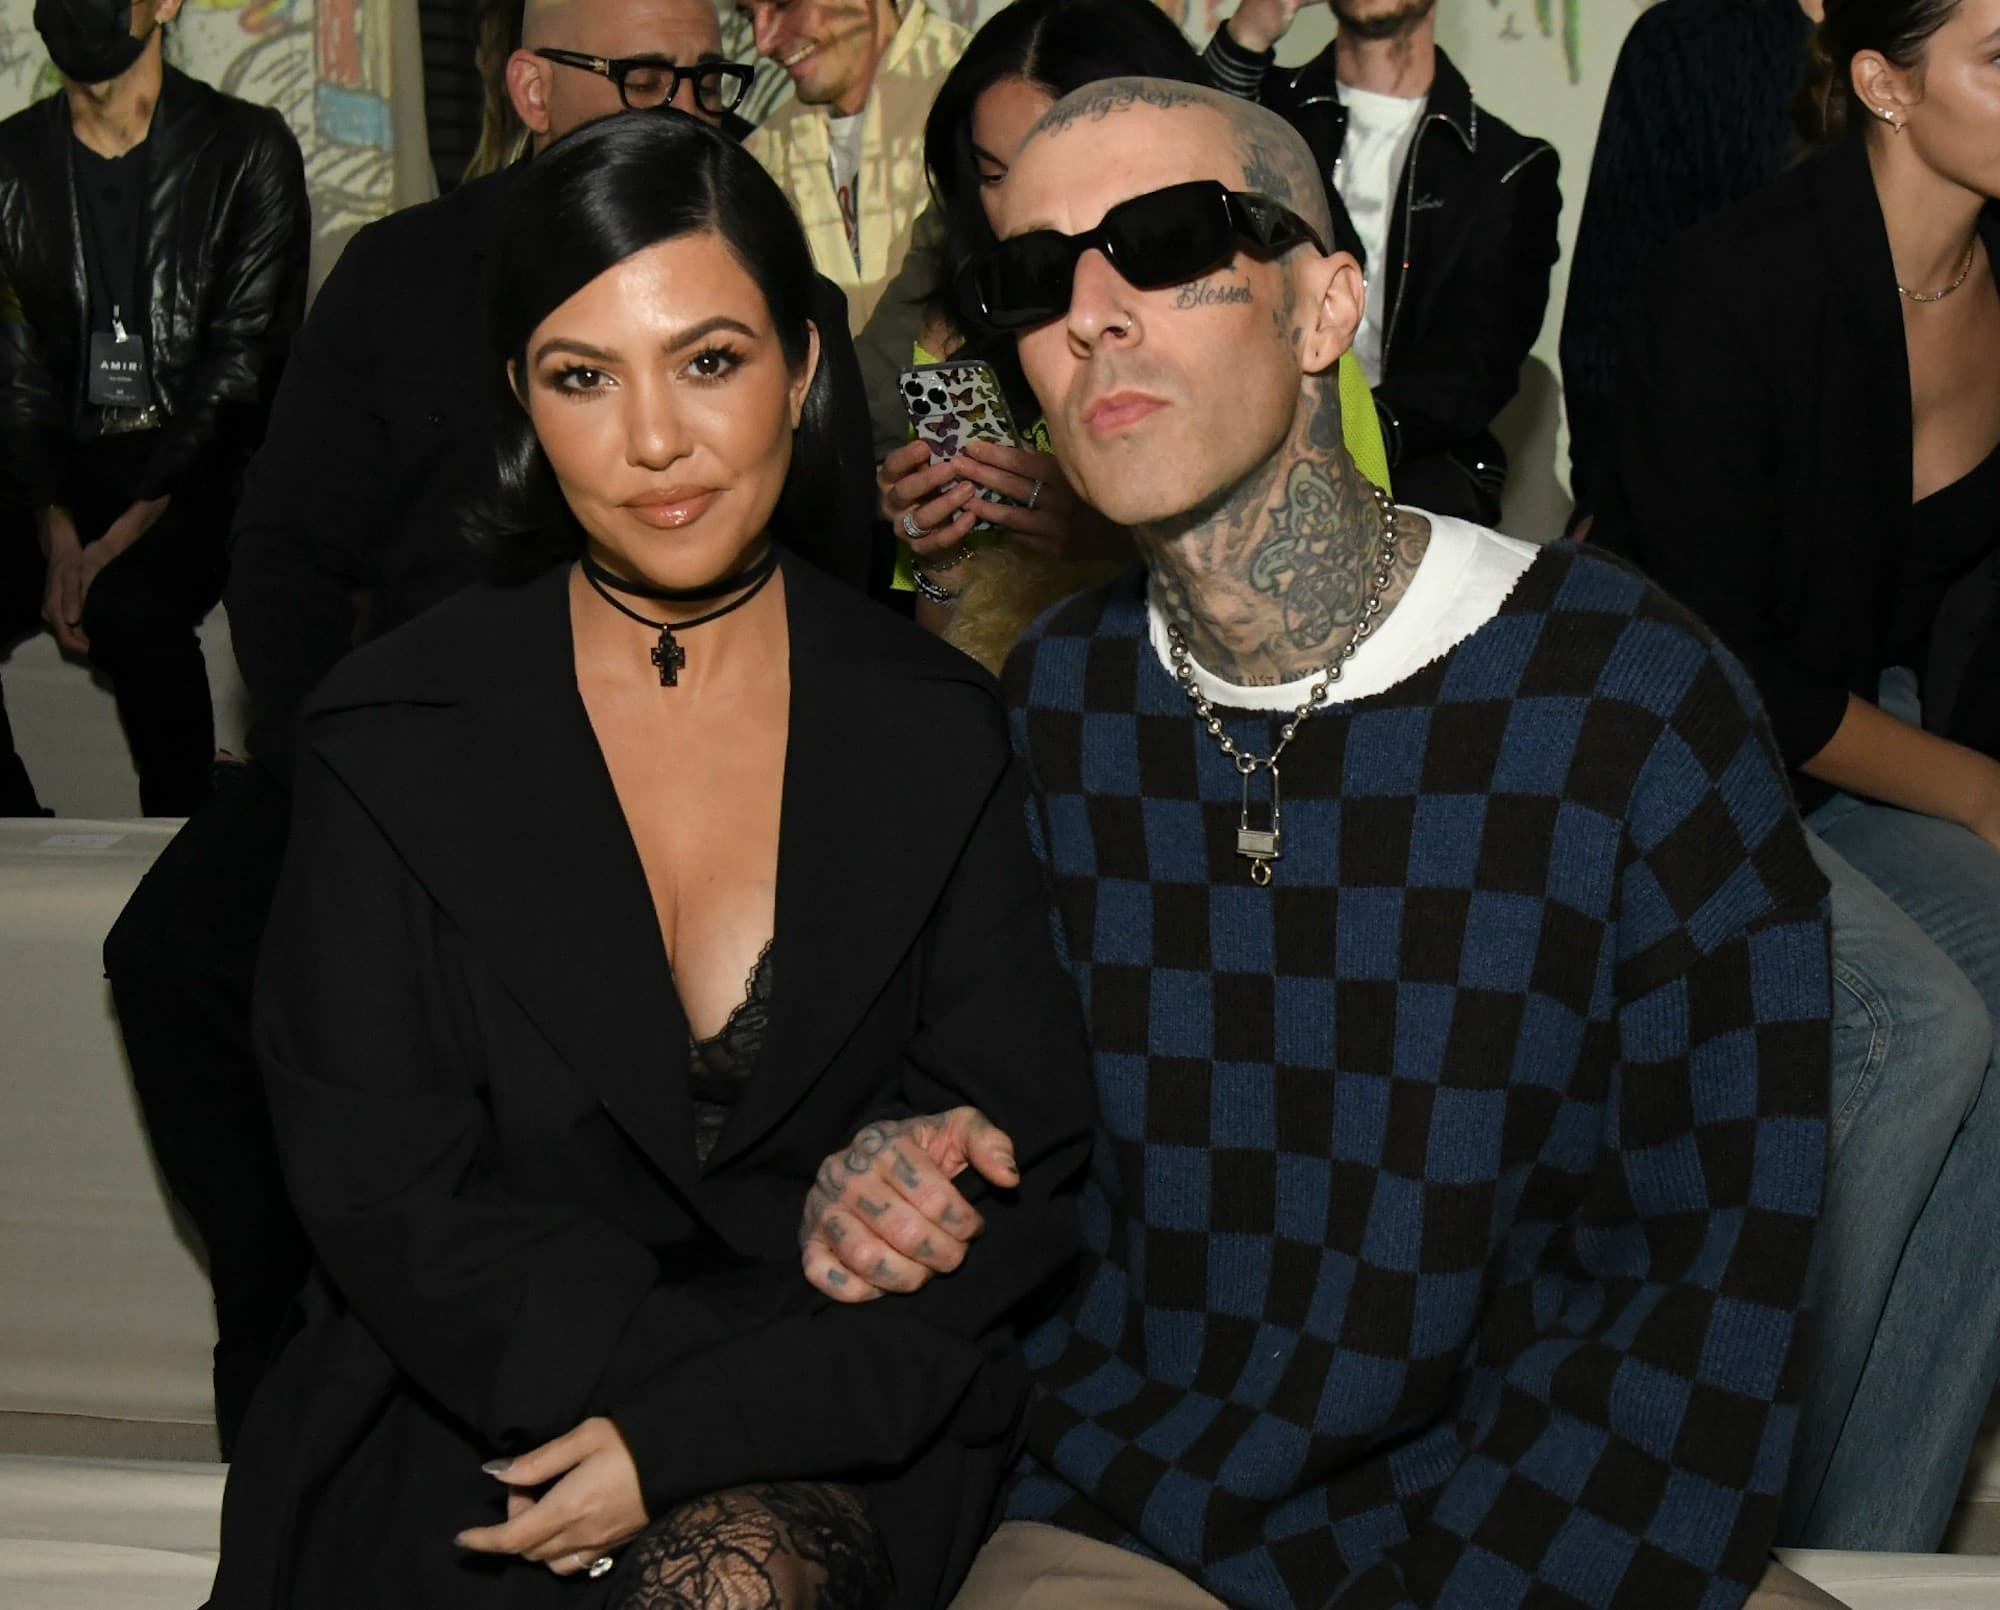 Married life: What is Kourtney Kardashian and Travis Barker’s joint net worth?